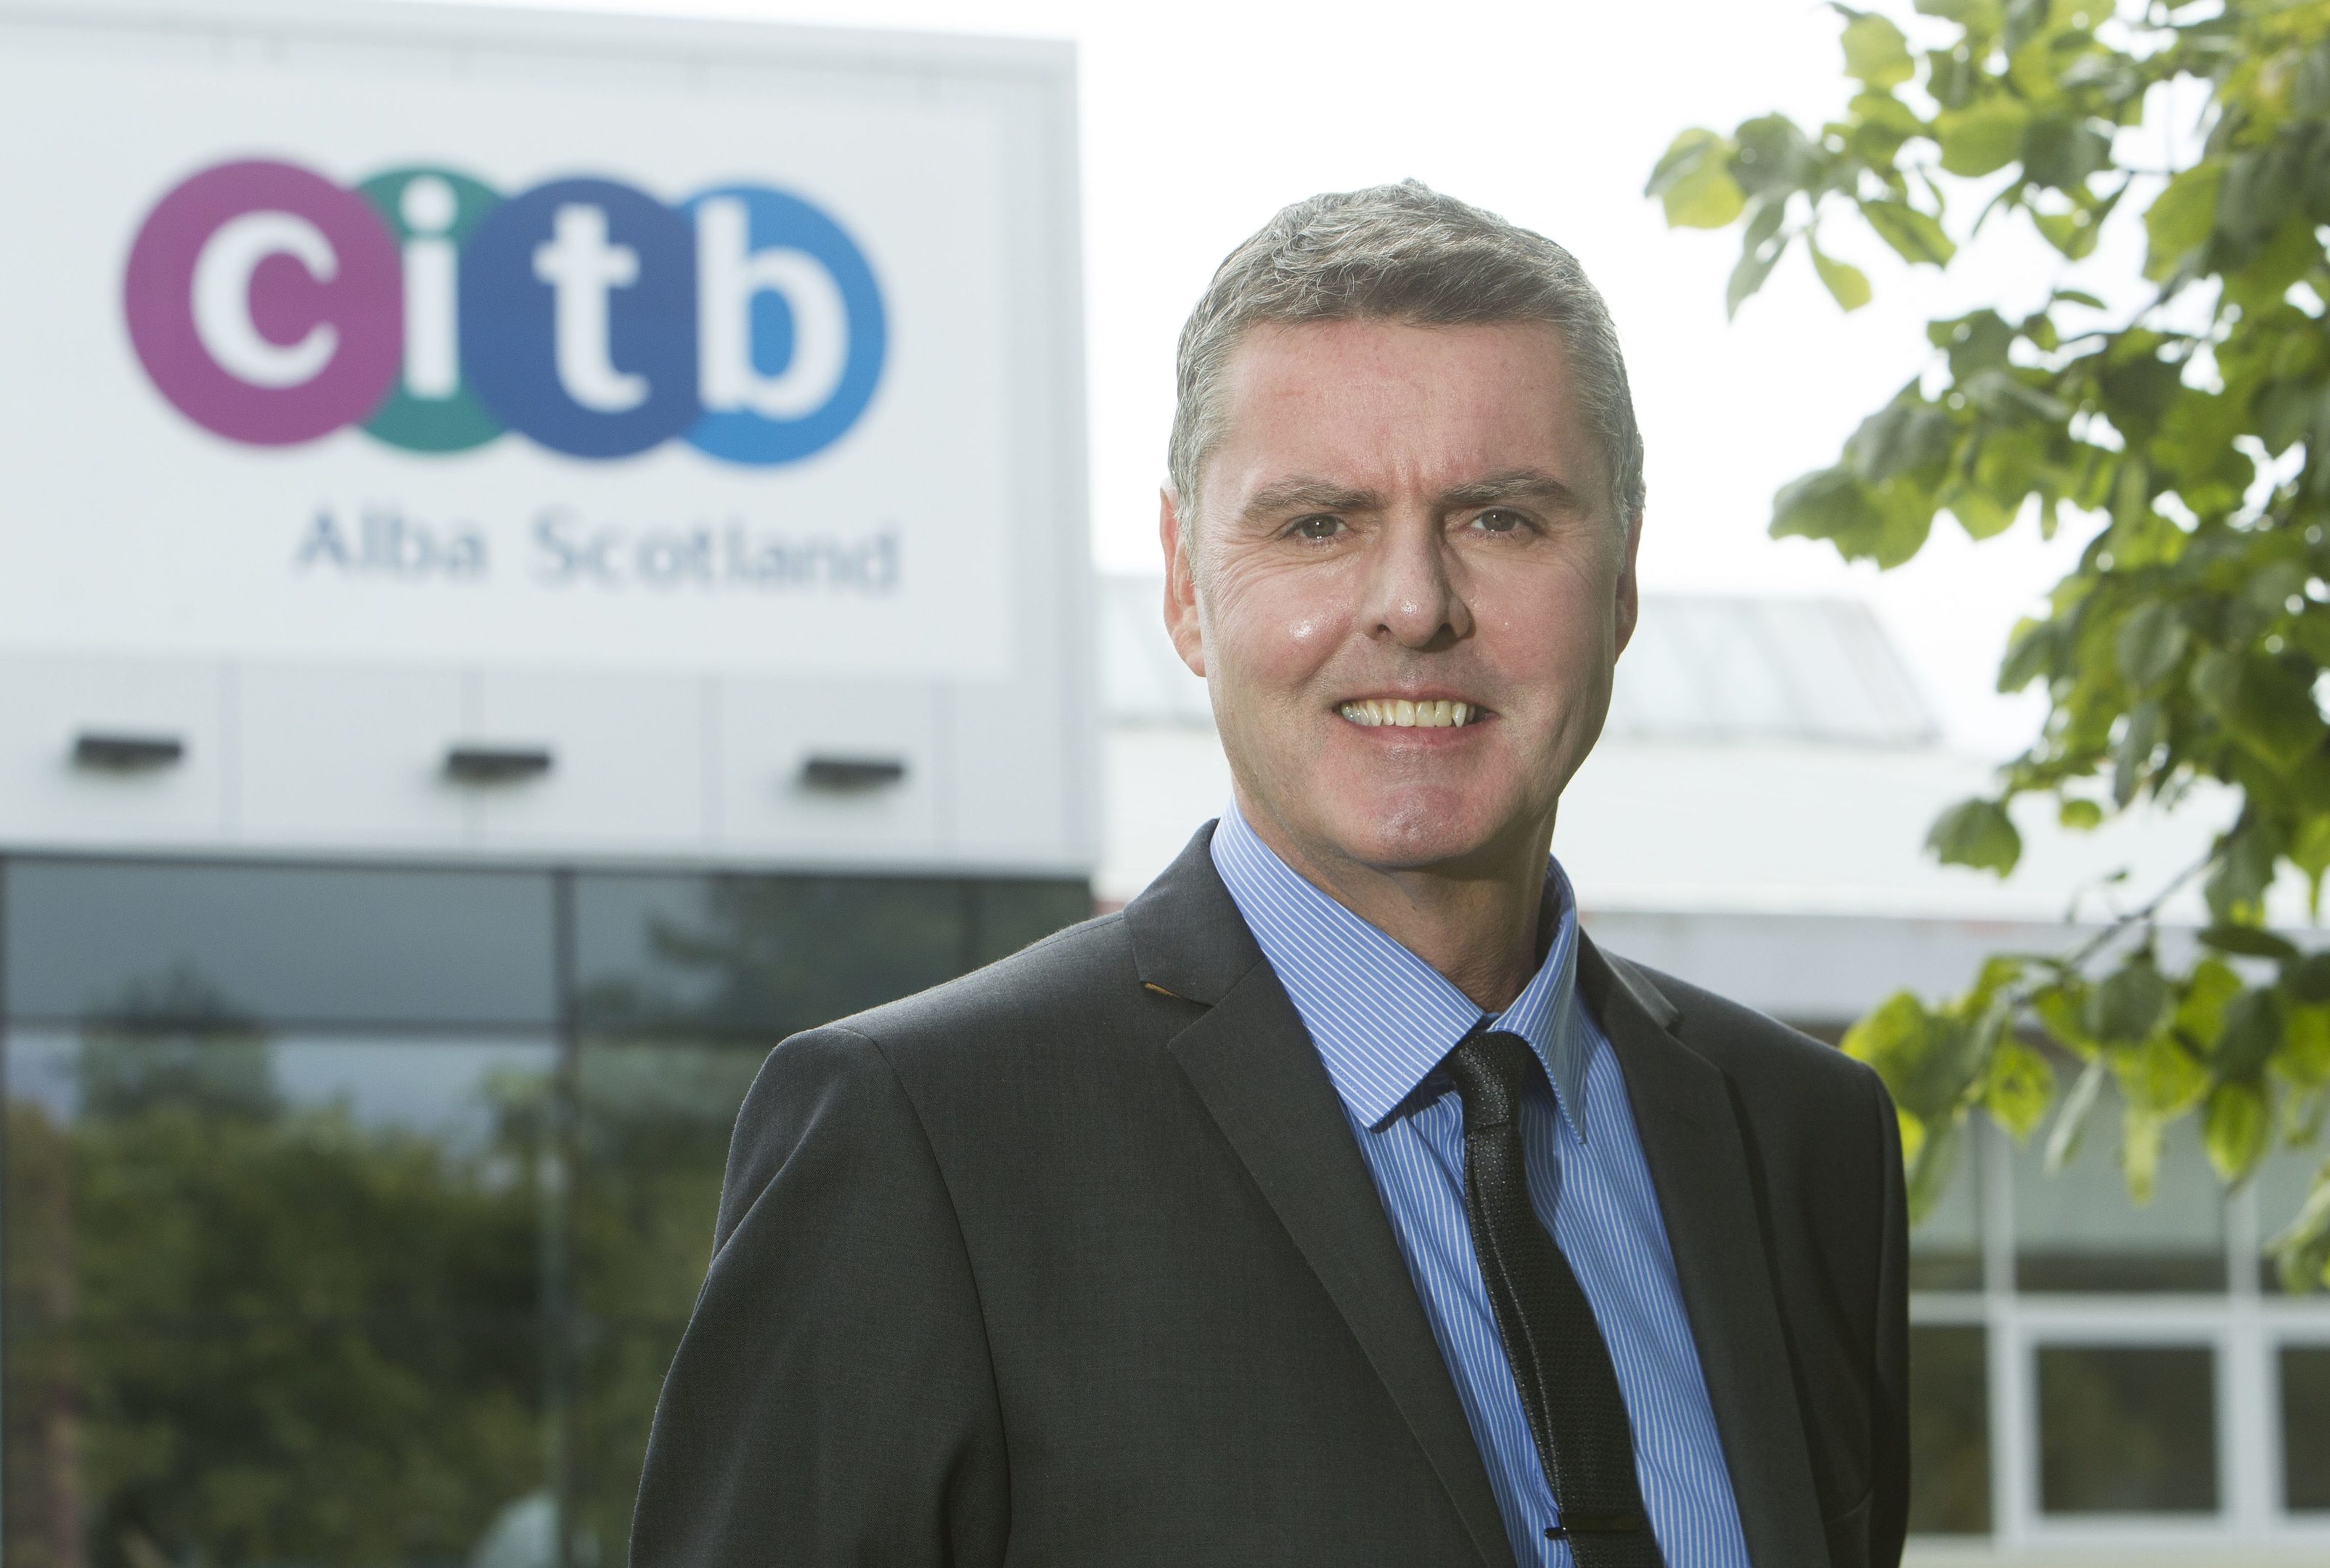 Apprentices to reap benefits as CITB and Skills Development Scotland join forces